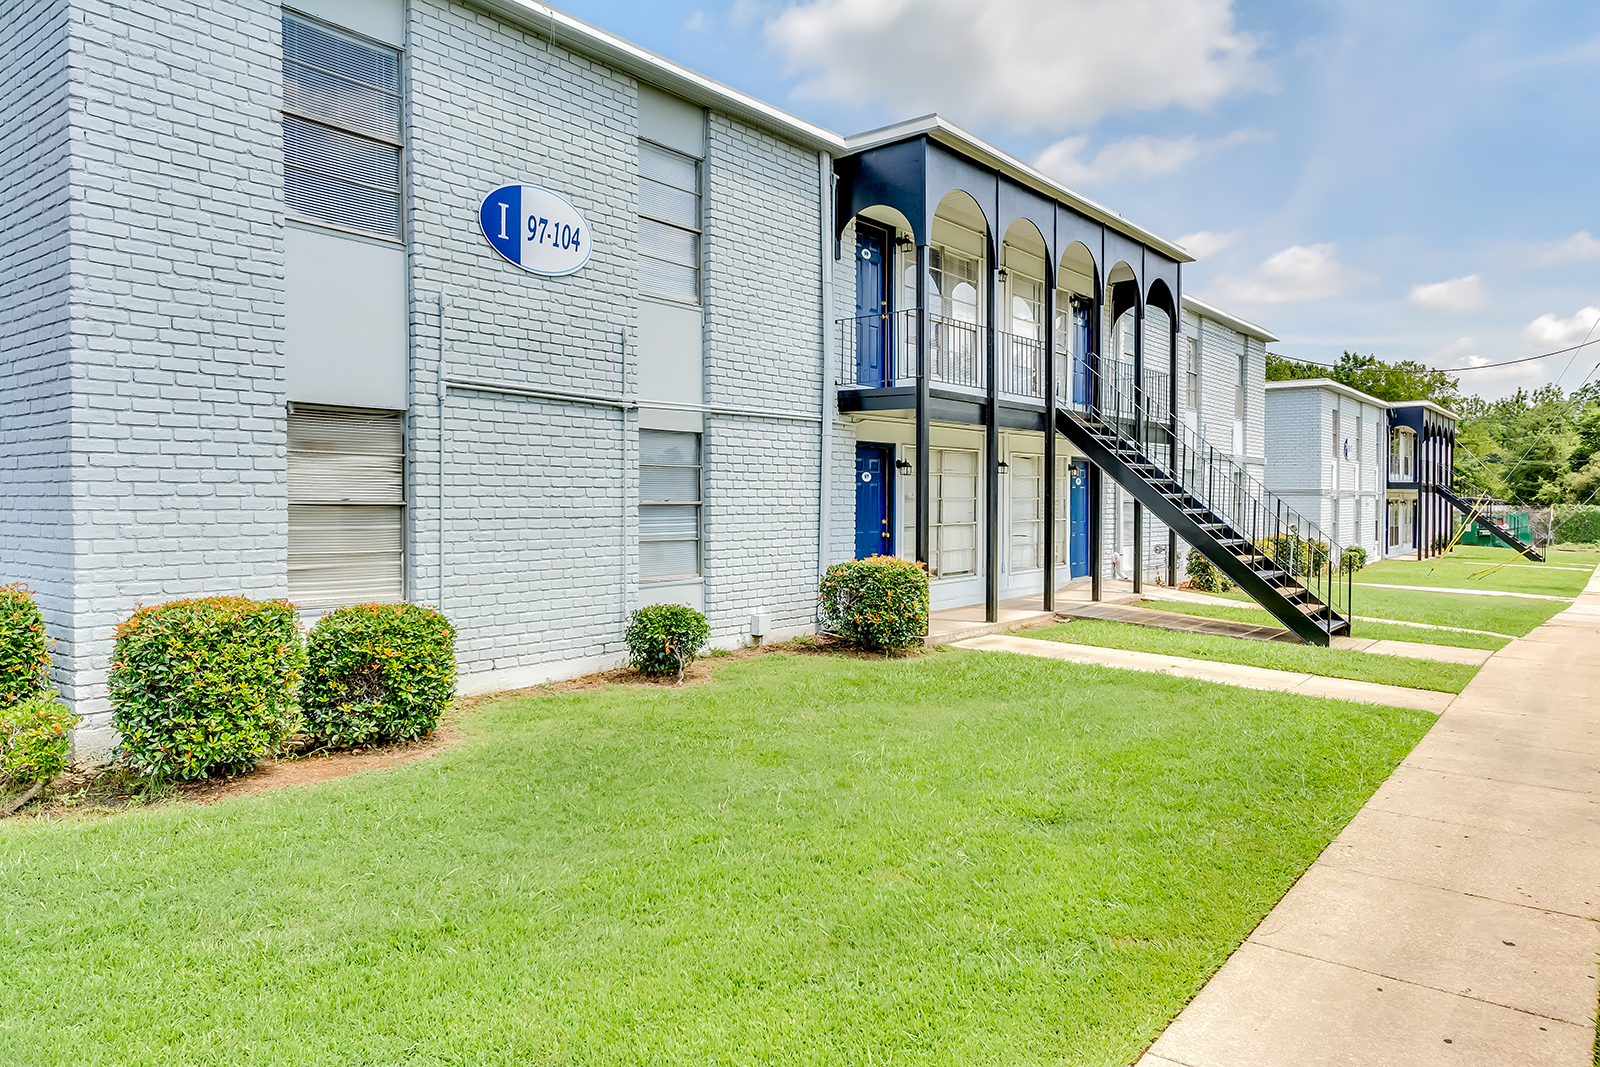 Elevation Announces Sale of Alabama Multifamily Property for $5.28 Million